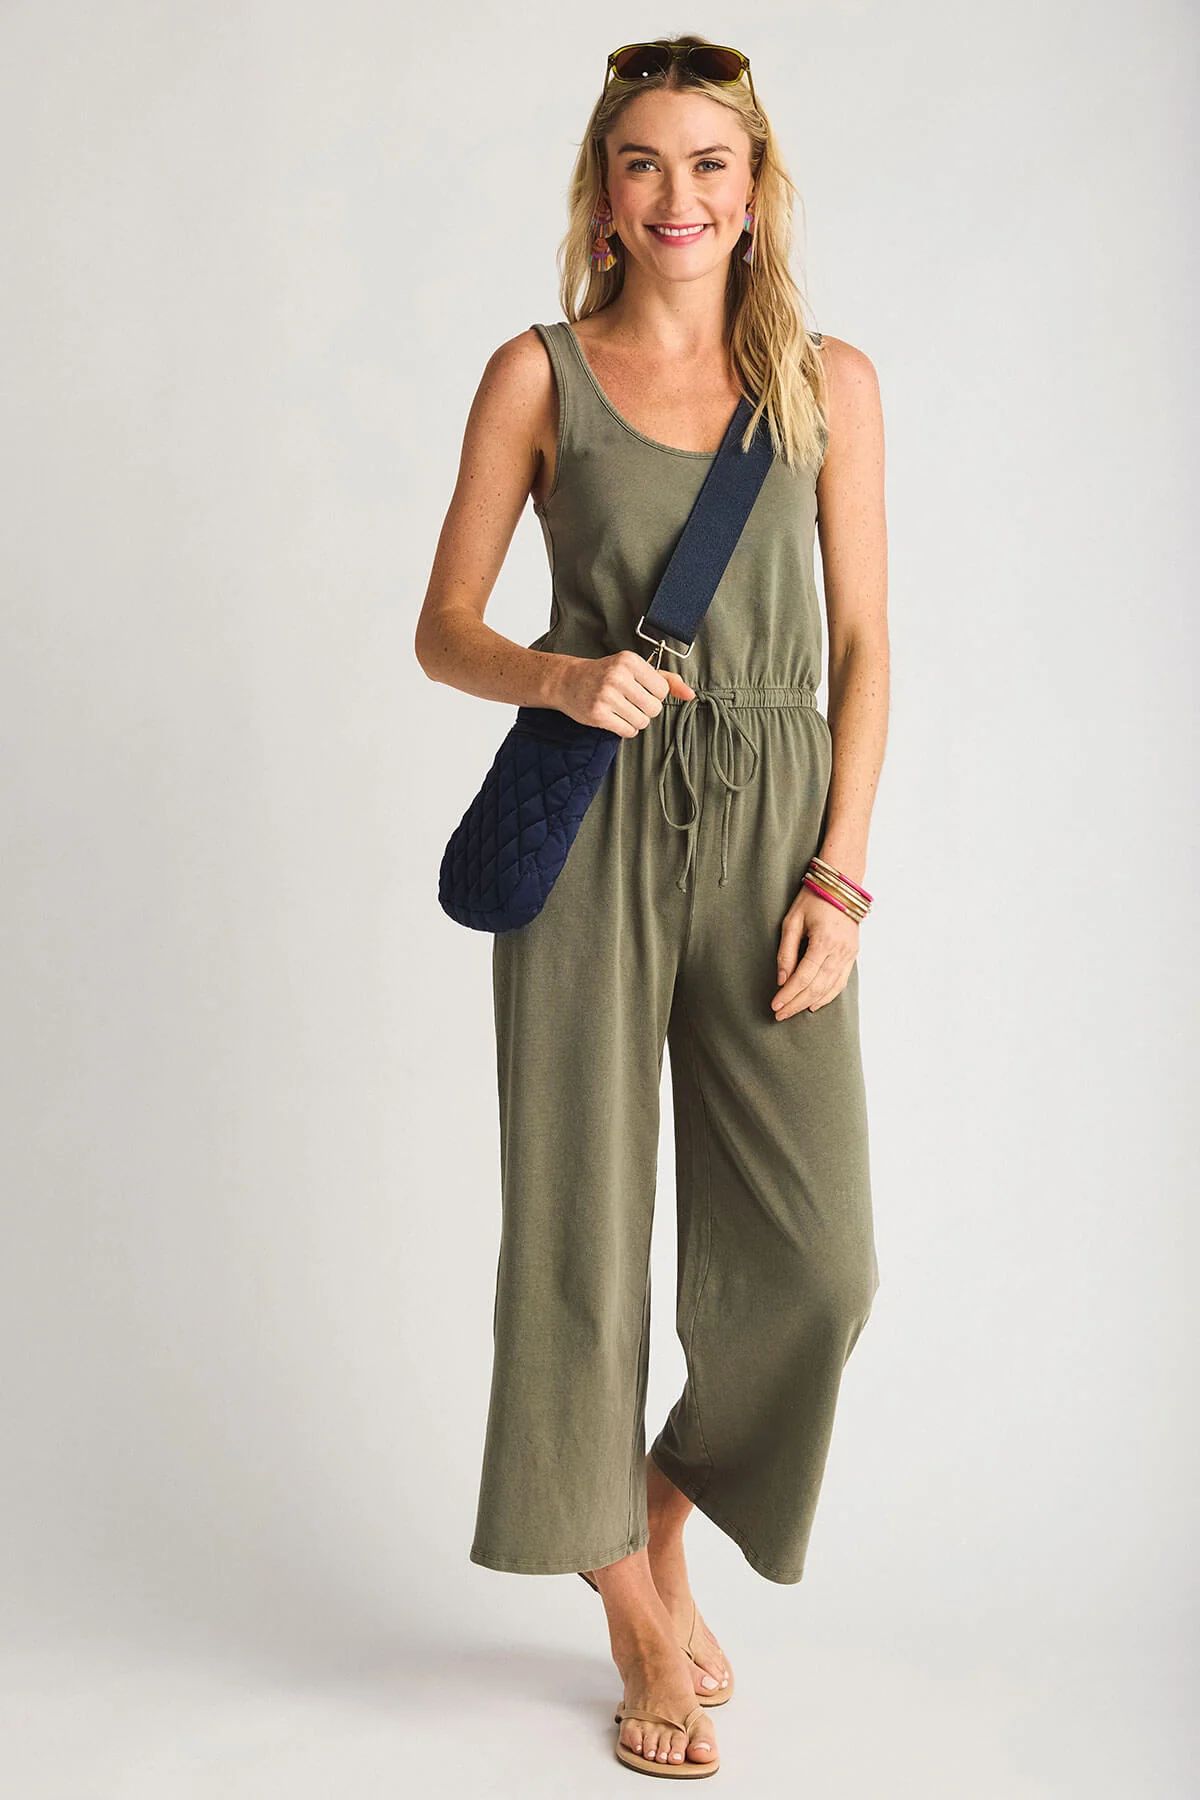 Z Supply Easygoing Jumpsuit | Social Threads